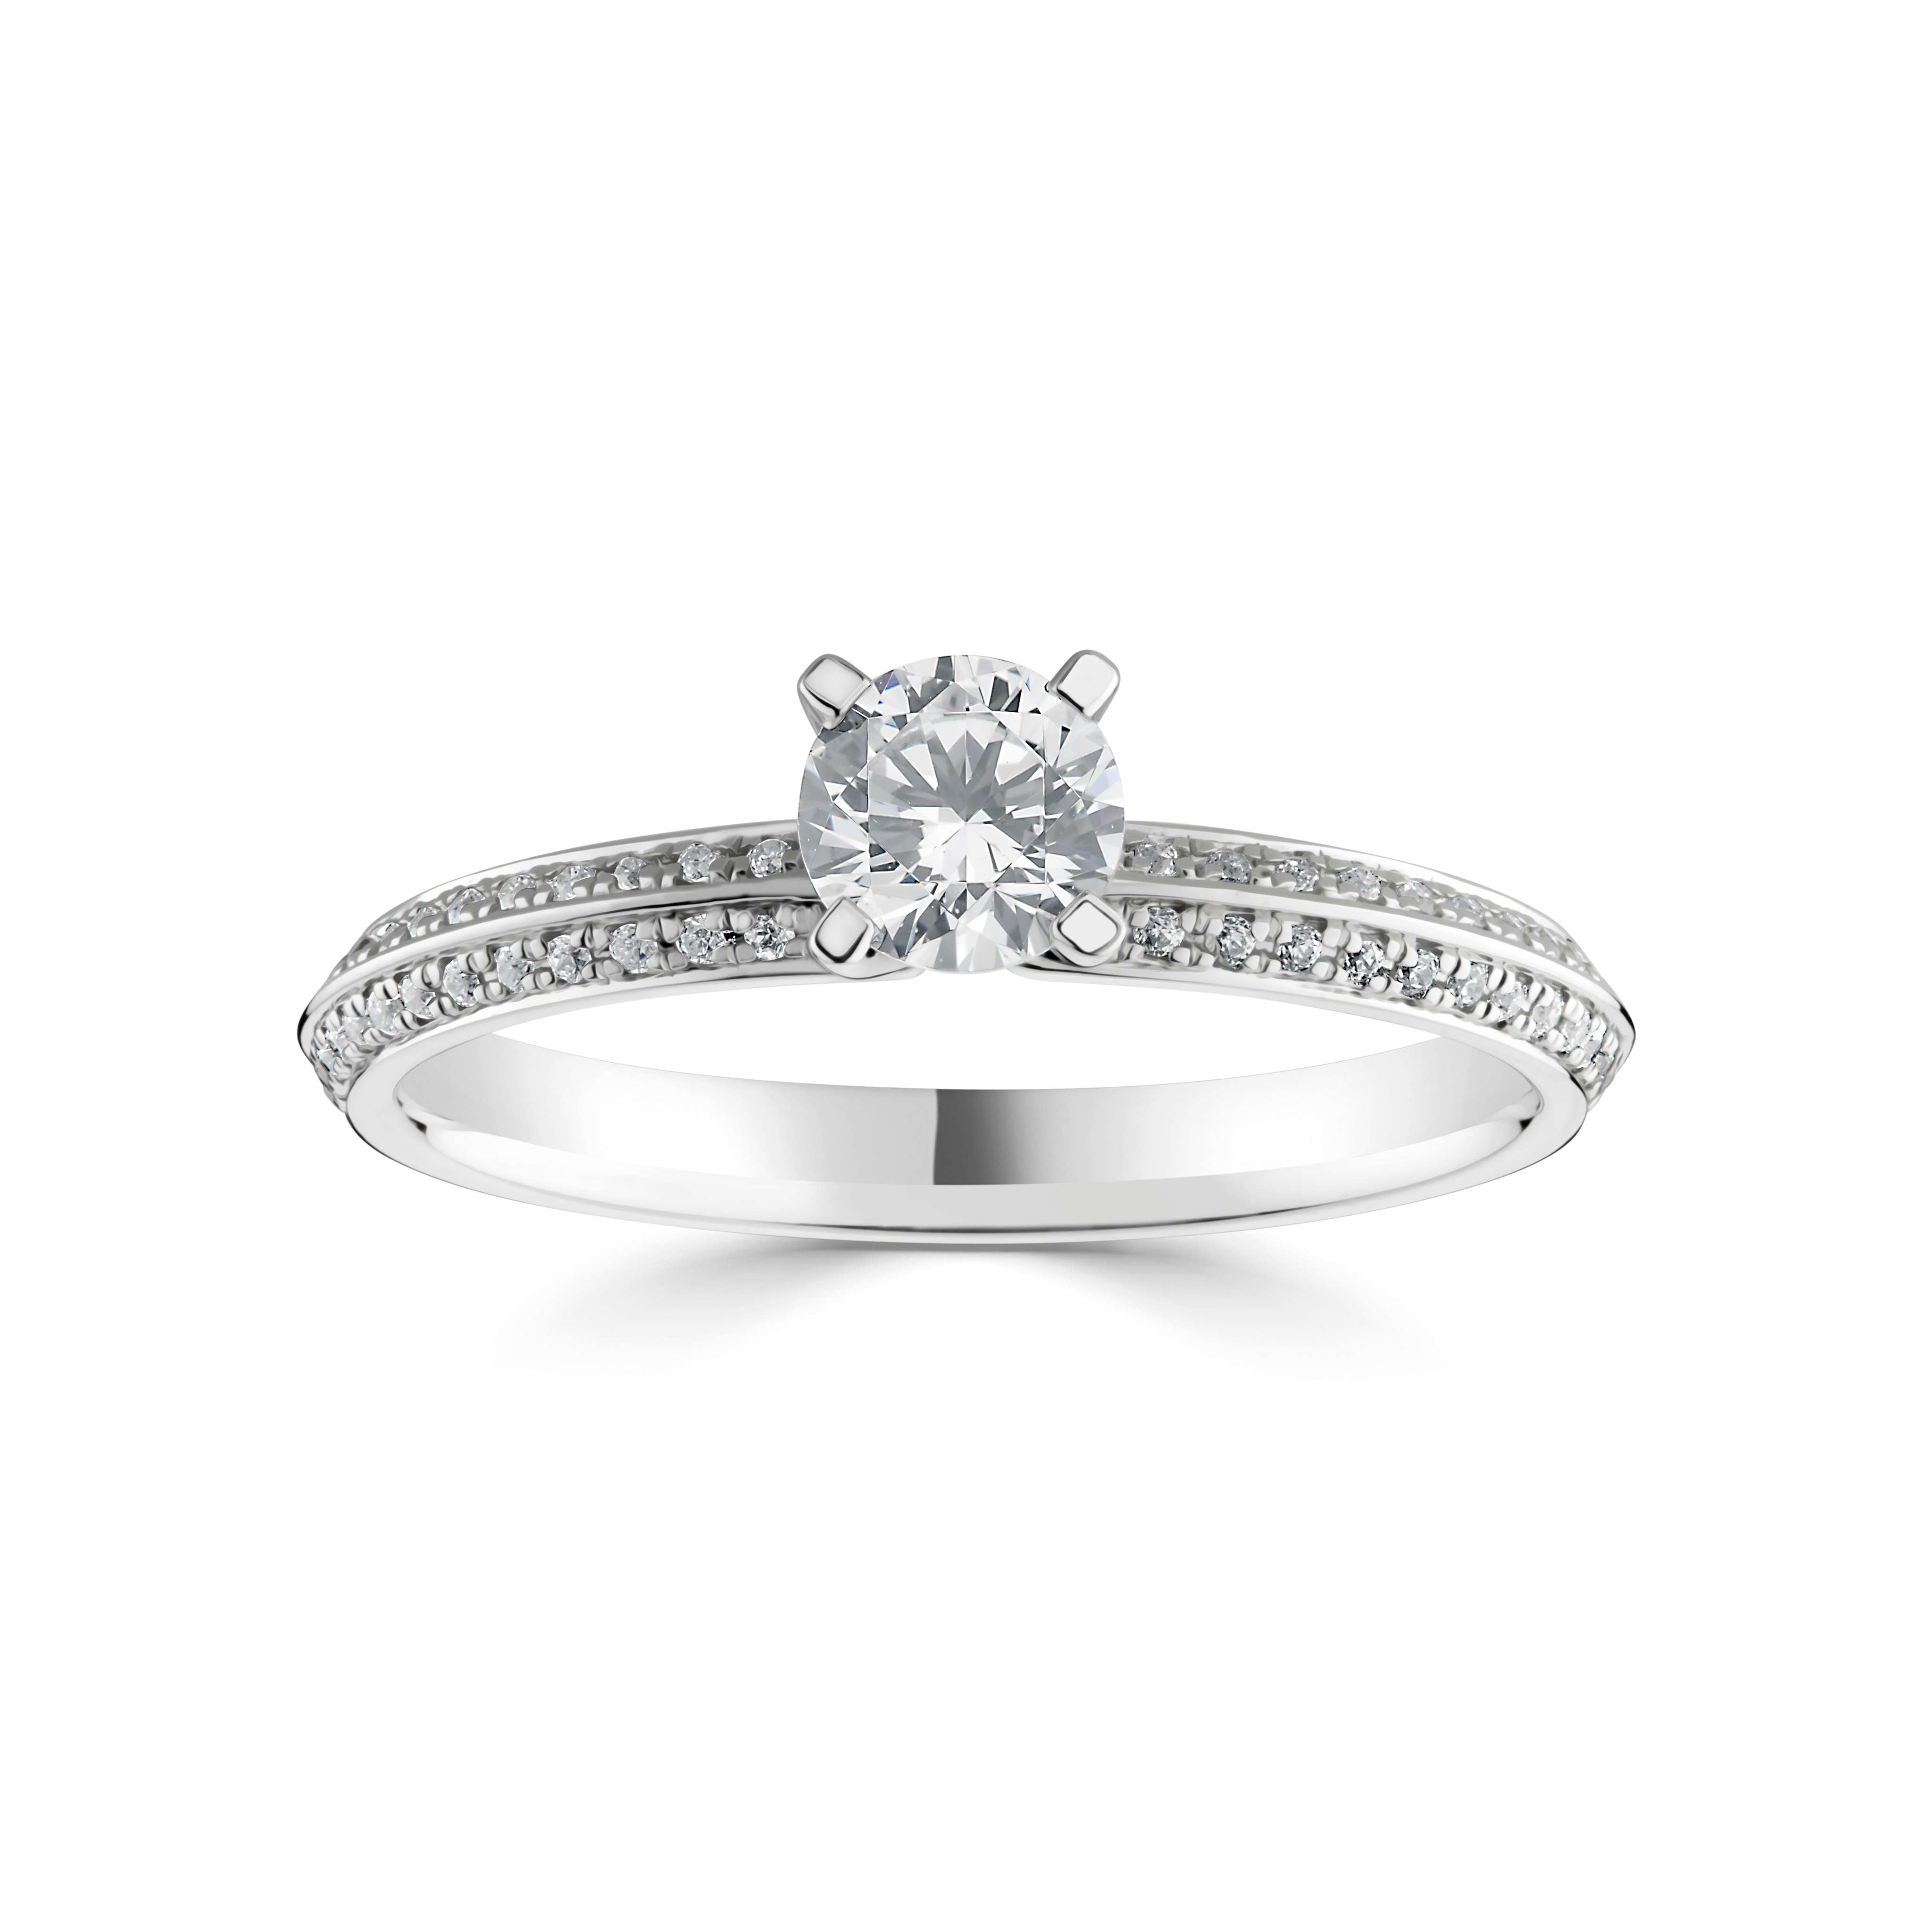 Lexi *Select a Round Diamond 0.25ct or above